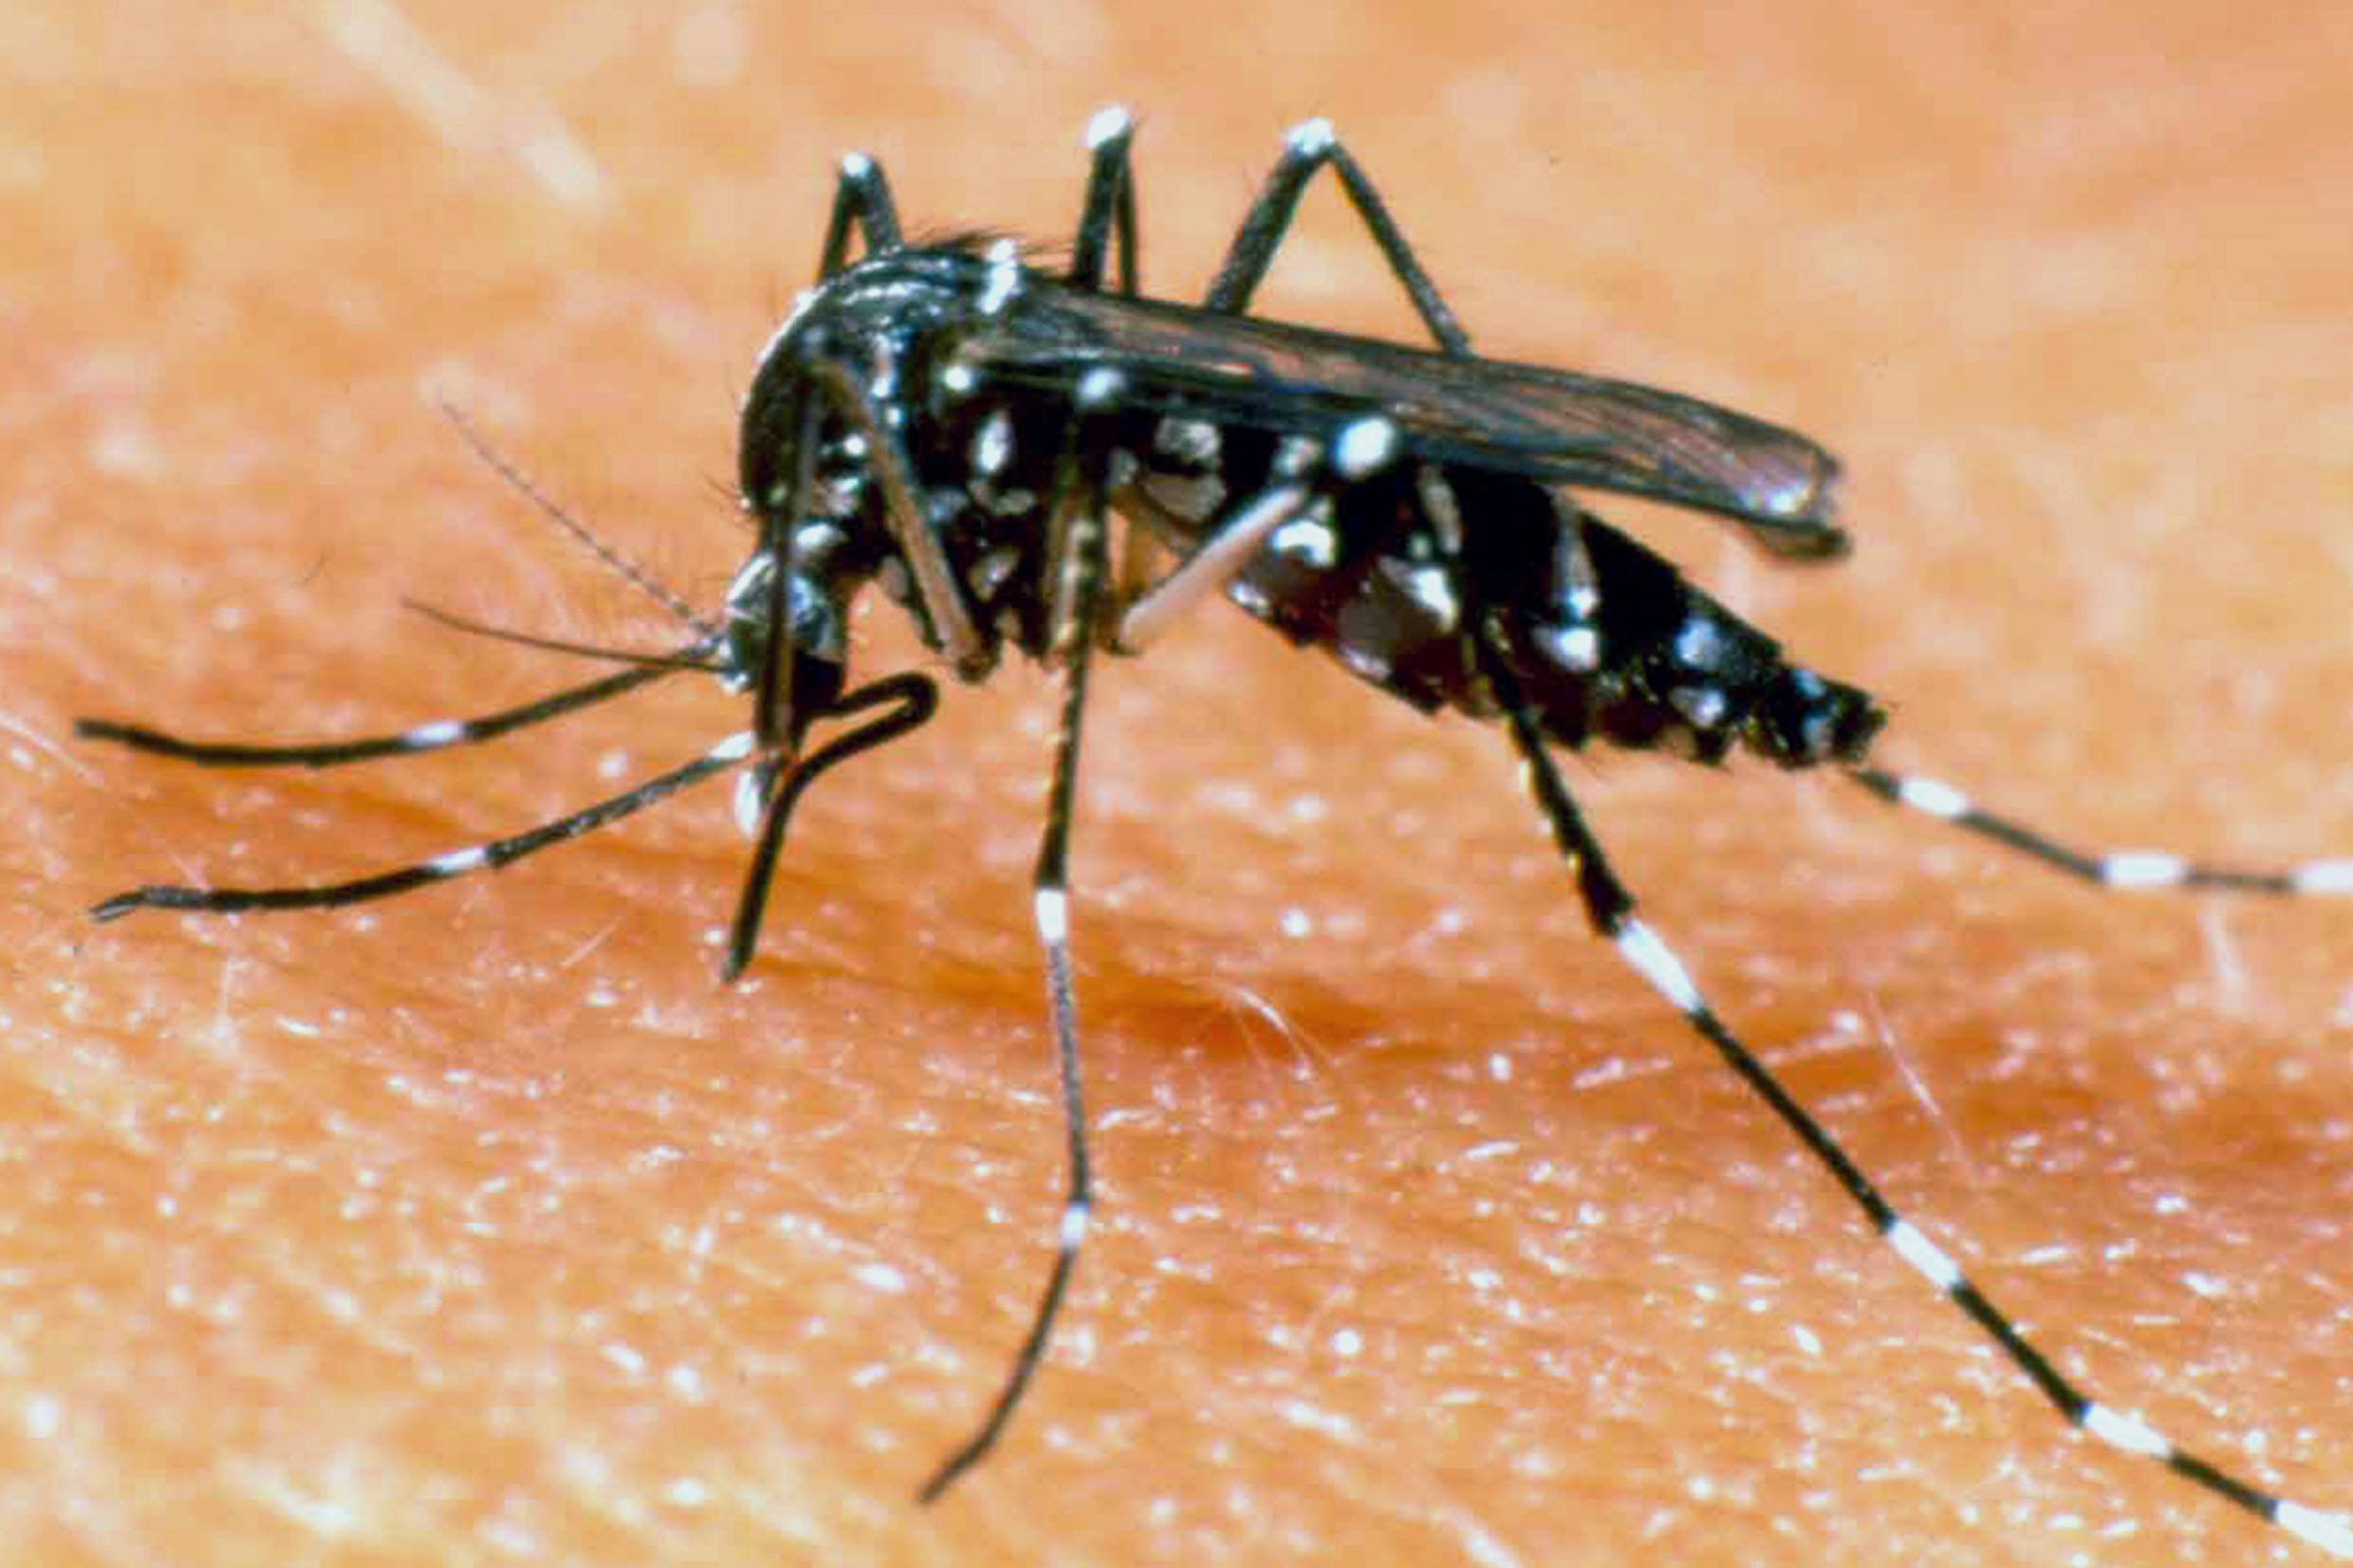 Mosquito Aedes aegypti<a style='float:right;color:#ccc' href='https://www3.al.sp.gov.br/repositorio/noticia/N-11-2018/fg227880.jpg' target=_blank><i class='bi bi-zoom-in'></i> Clique para ver a imagem </a>